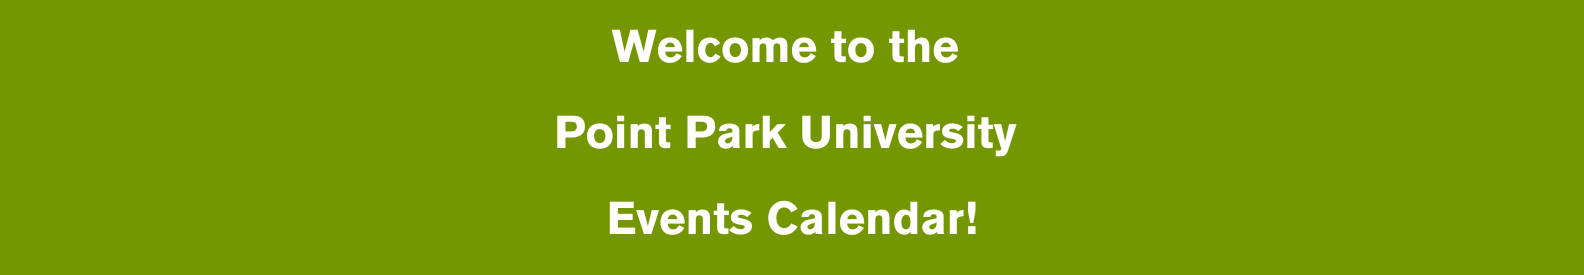 Green banner that says "Welcome to the Point Park University Events Calendar!"